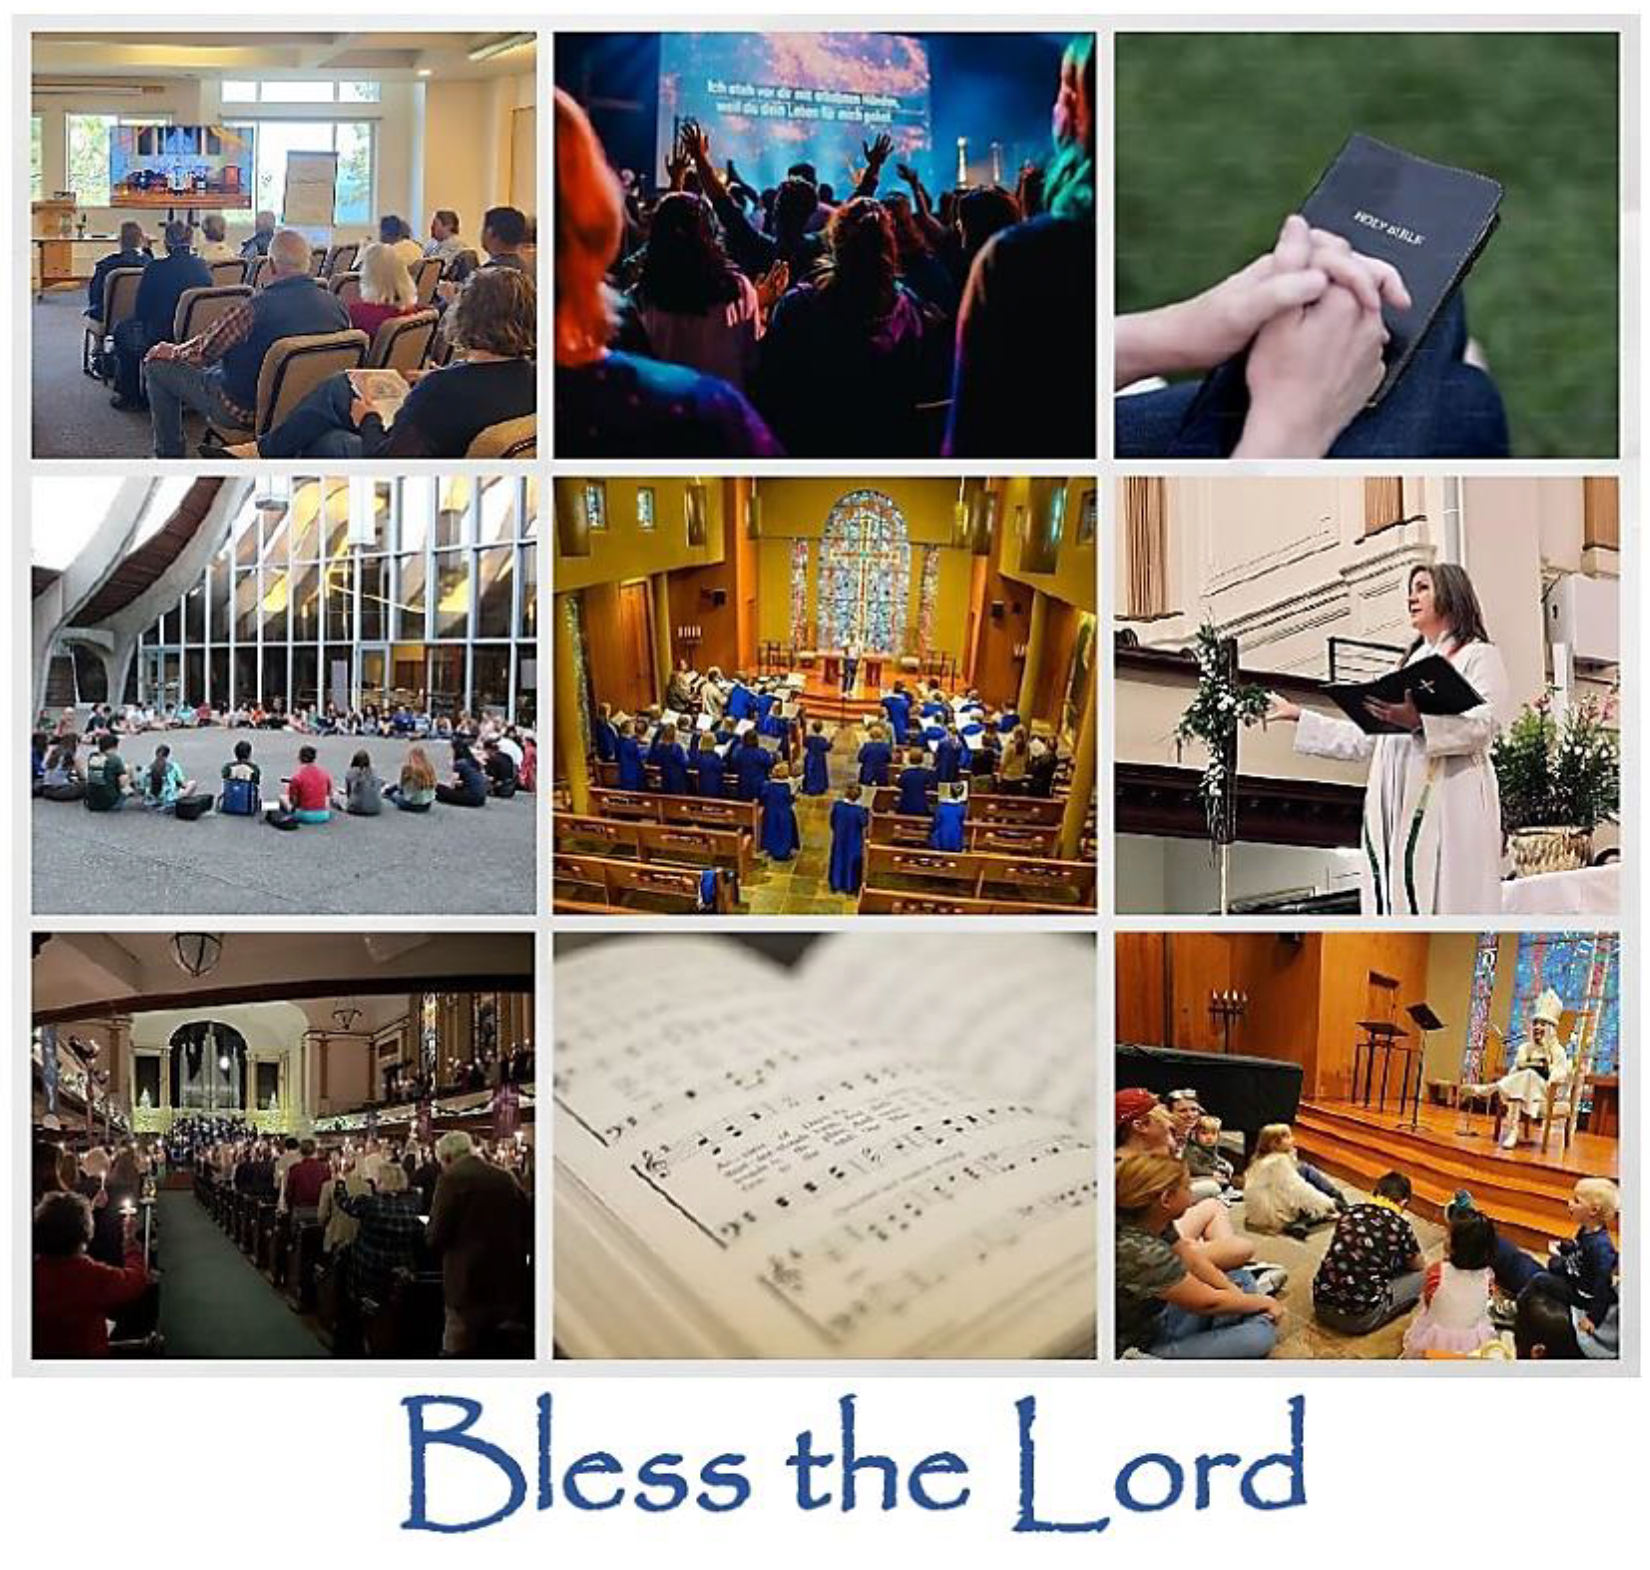 A grid of pictures of music, togetherness, worship services, group meetings, large circles of people